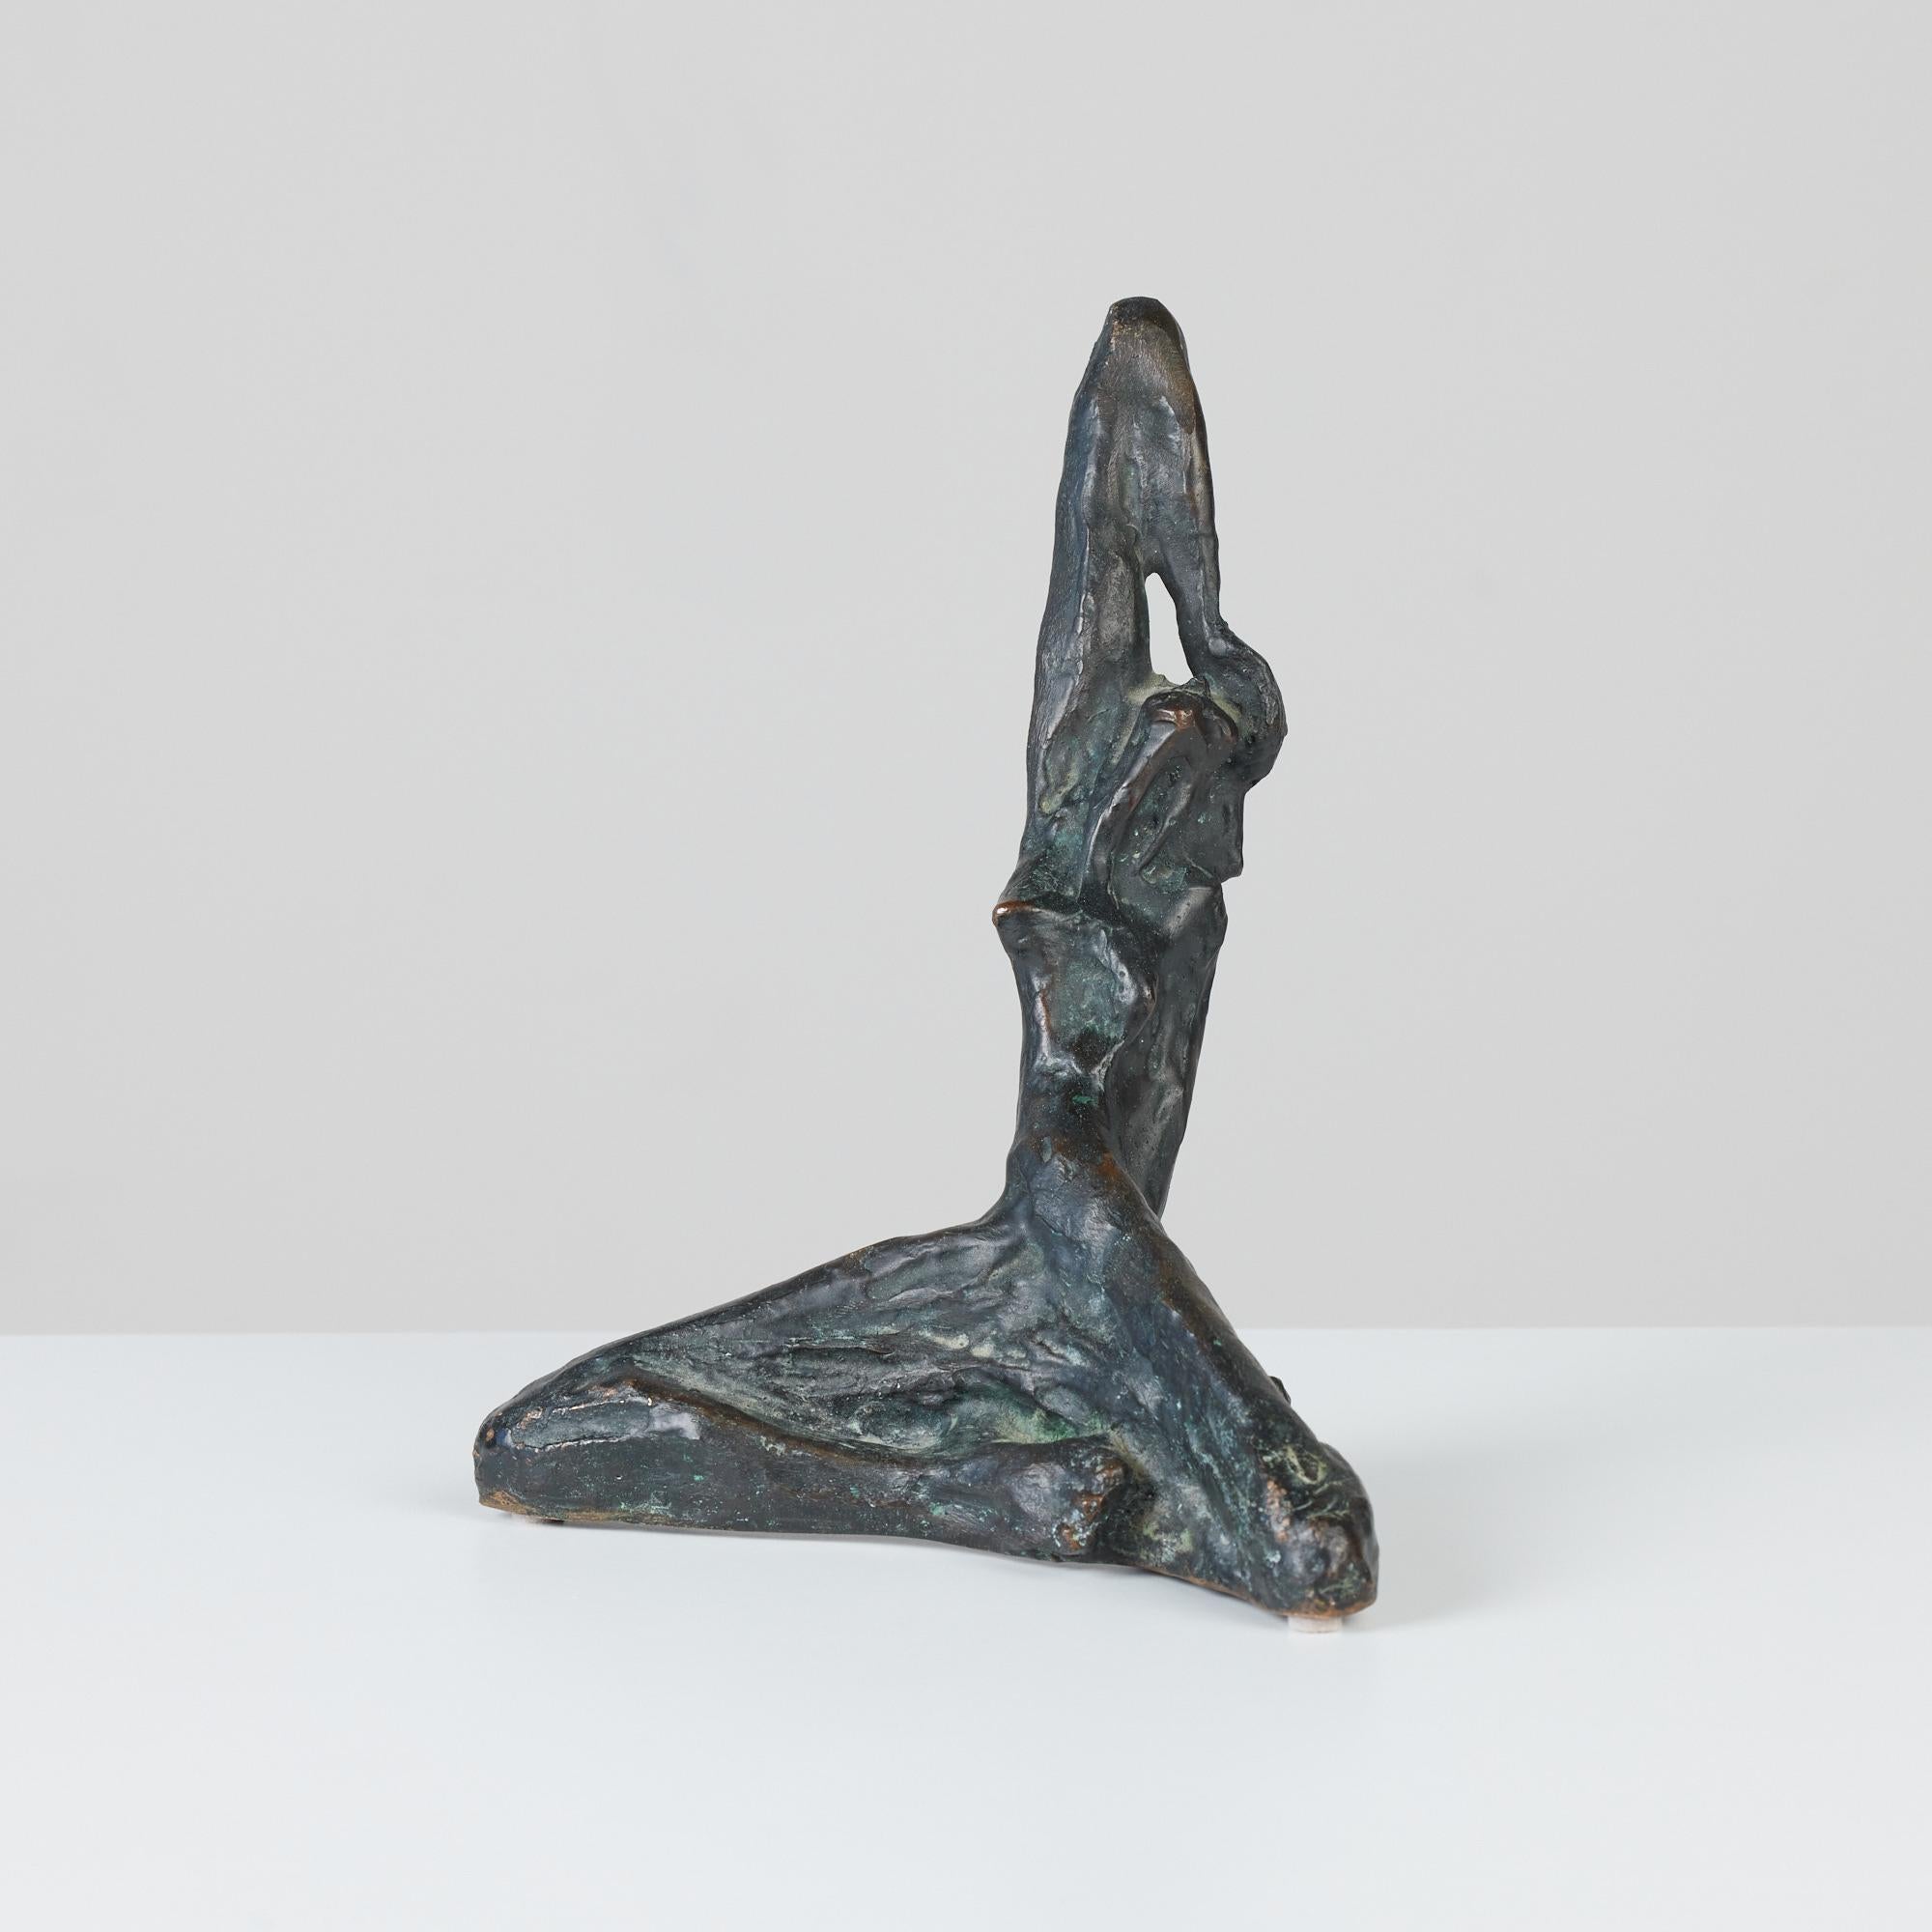 Bronze sculpture by artist Carl Tasha, c.1970s, USA. Tasha was a sculptor from Provincetown, Massachusetts, known for his bronze jewelry, belt buckles and sculptures. This particular piece is of a feminine figure with one arm stretched over head